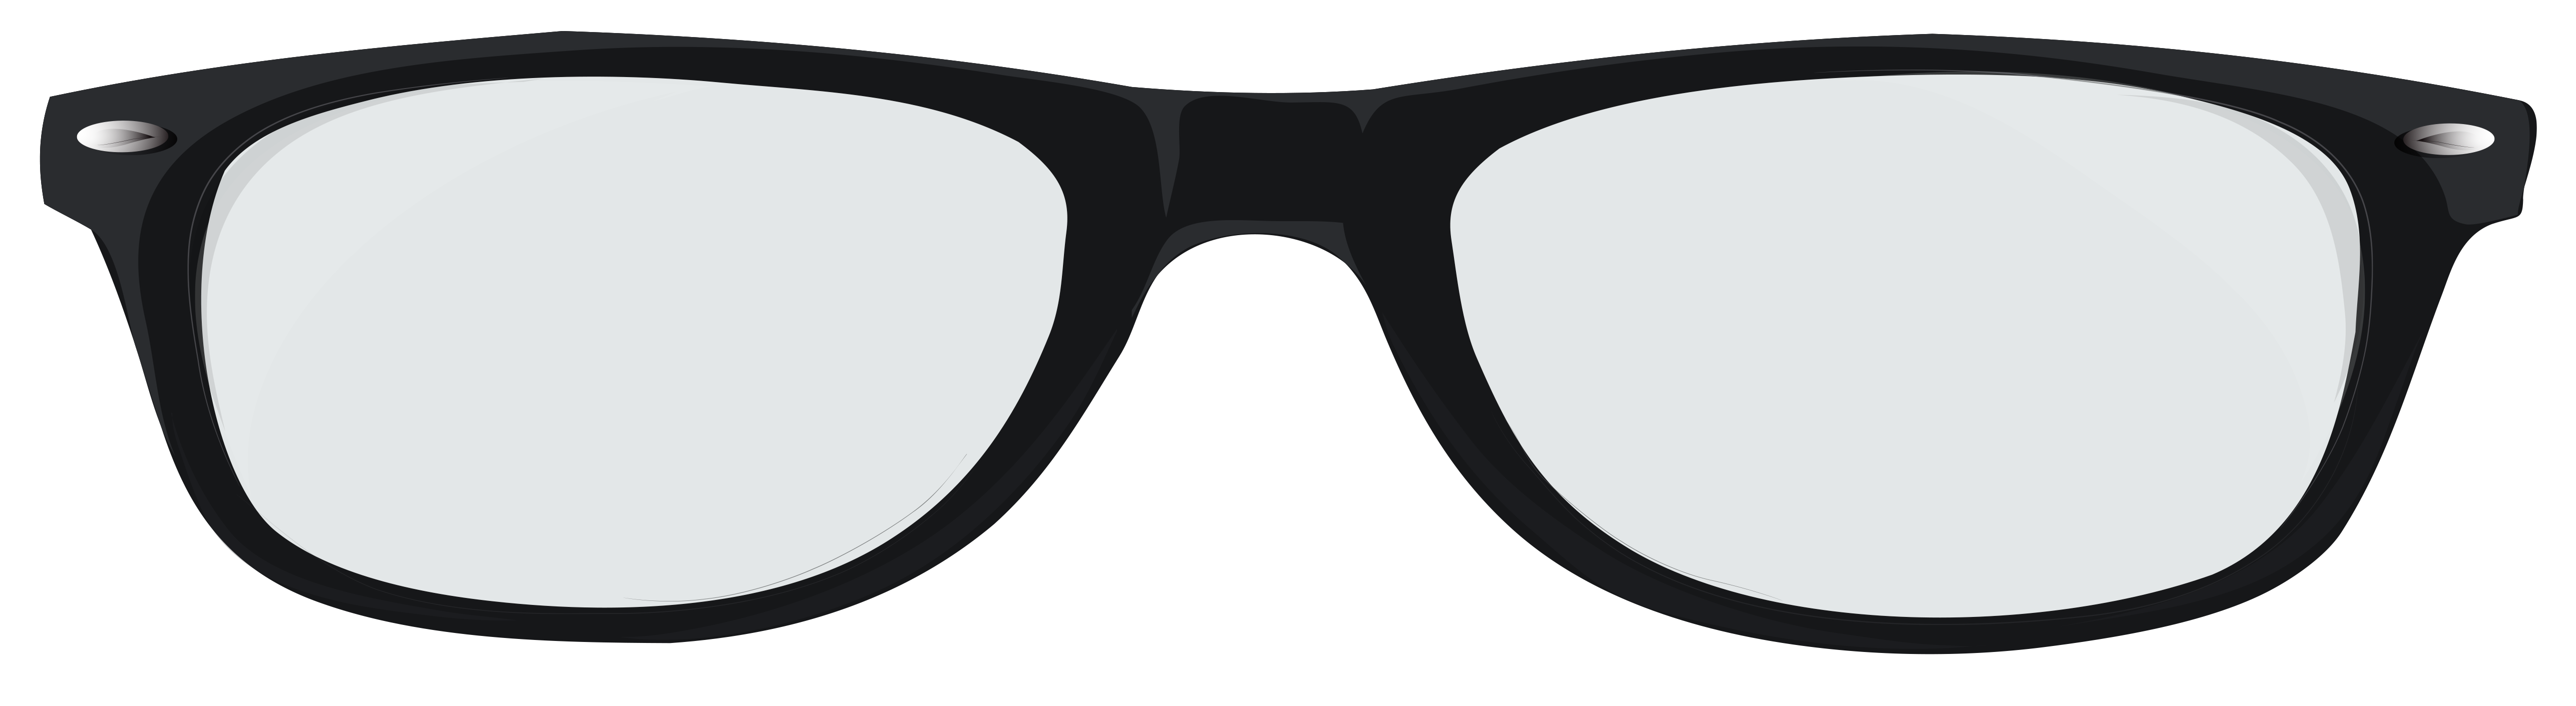 Download Glasses PNG Pictures | Gallery Yopriceville - High-Quality ...